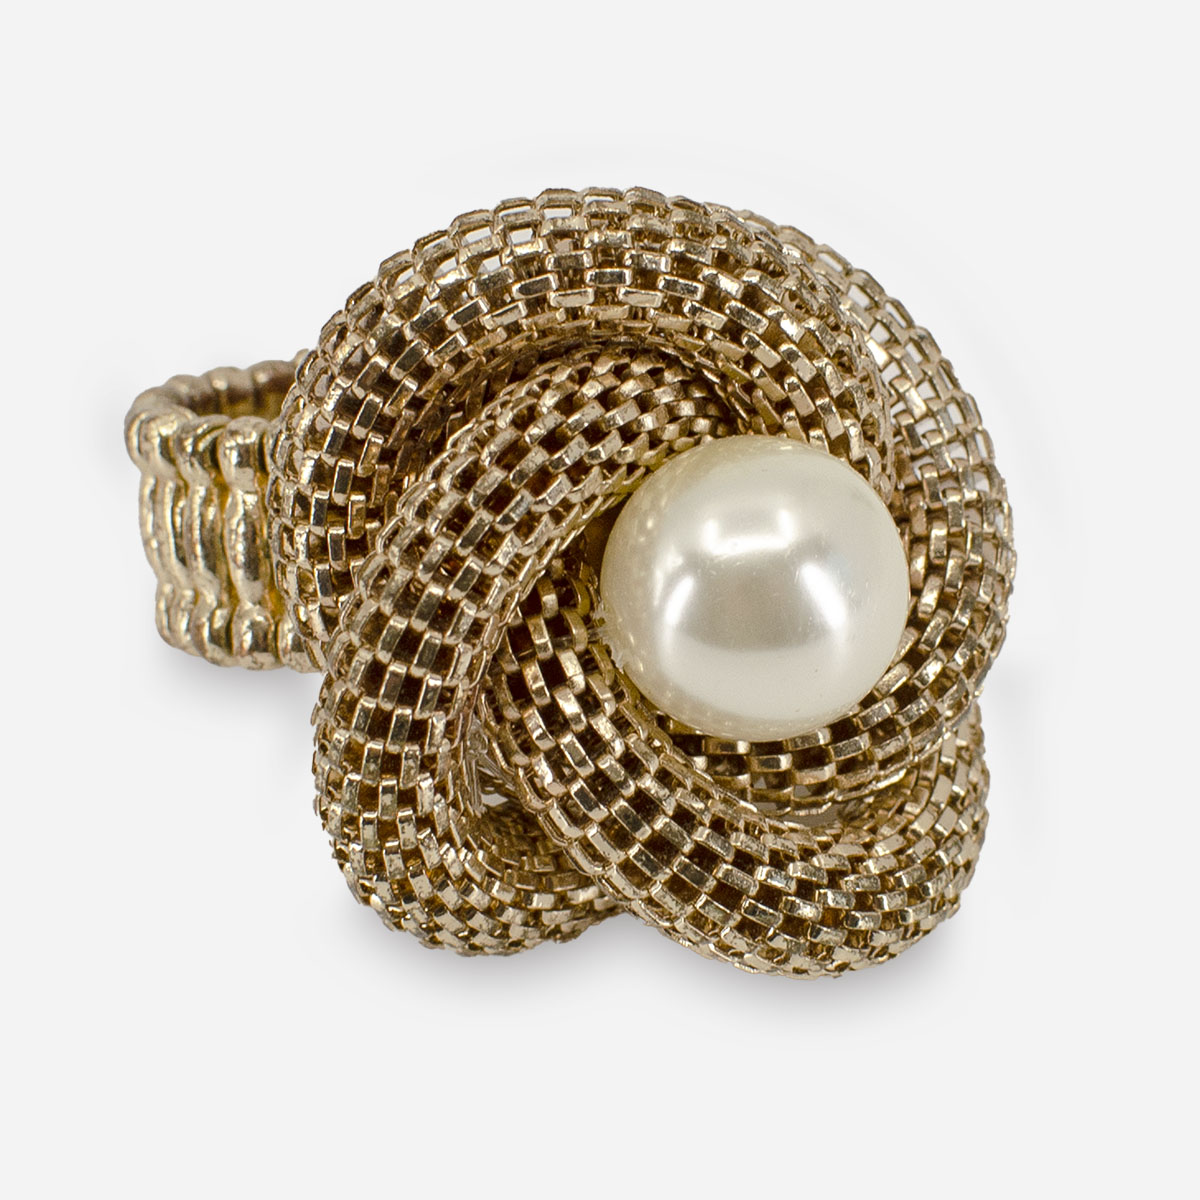 Statement knot ring